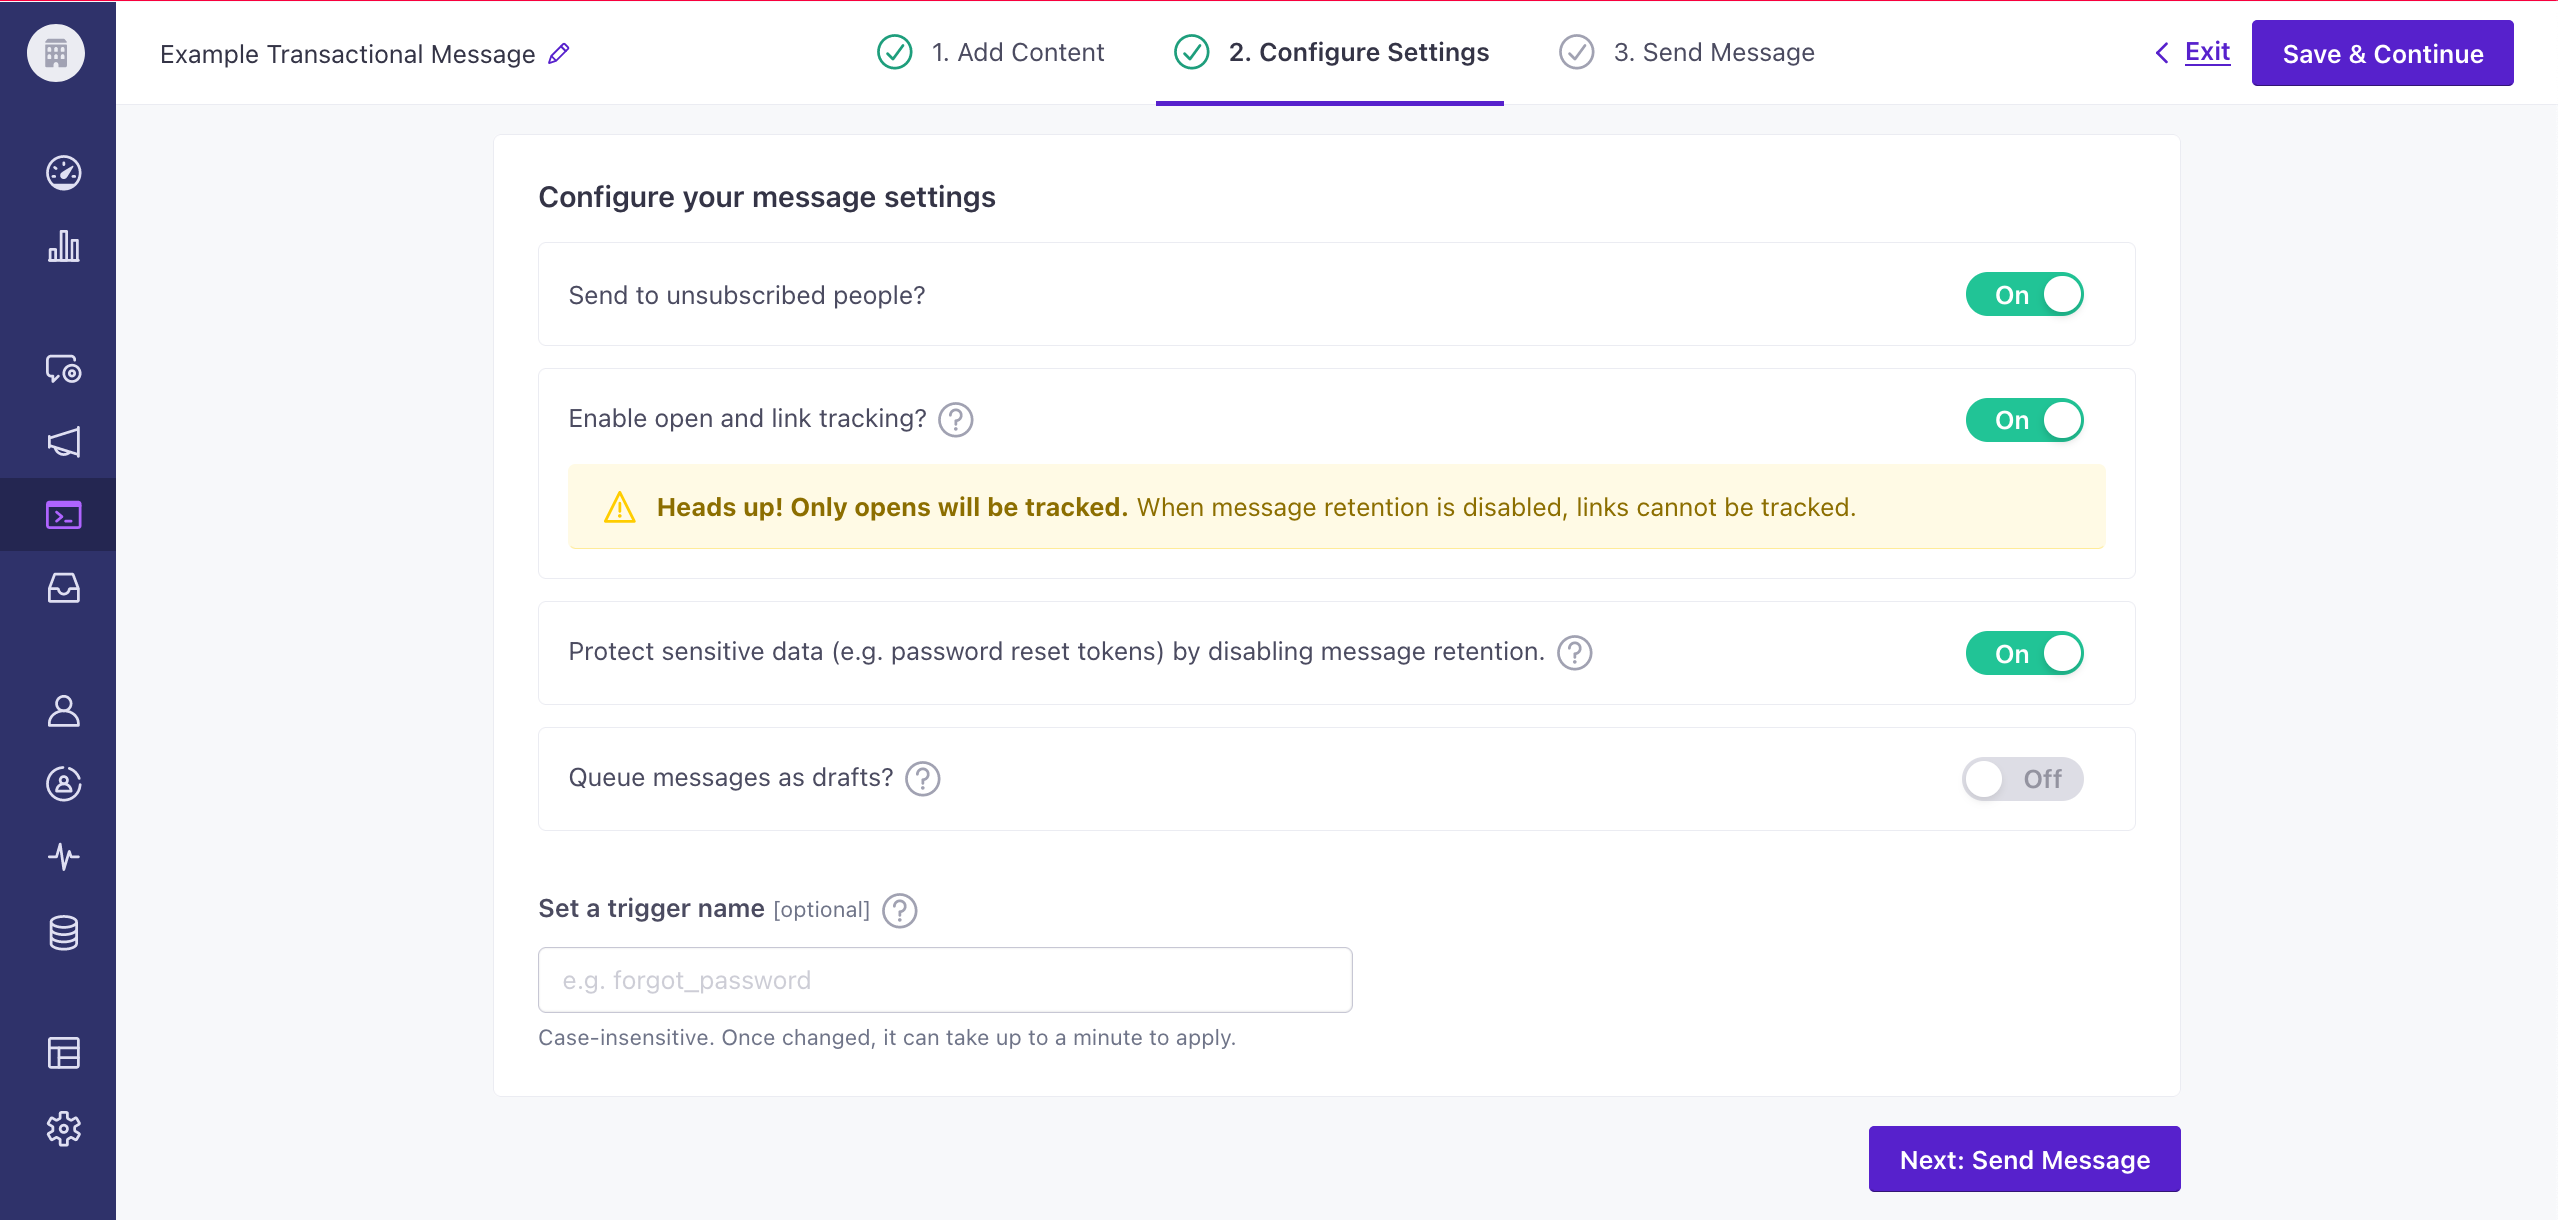 configure your message's settings